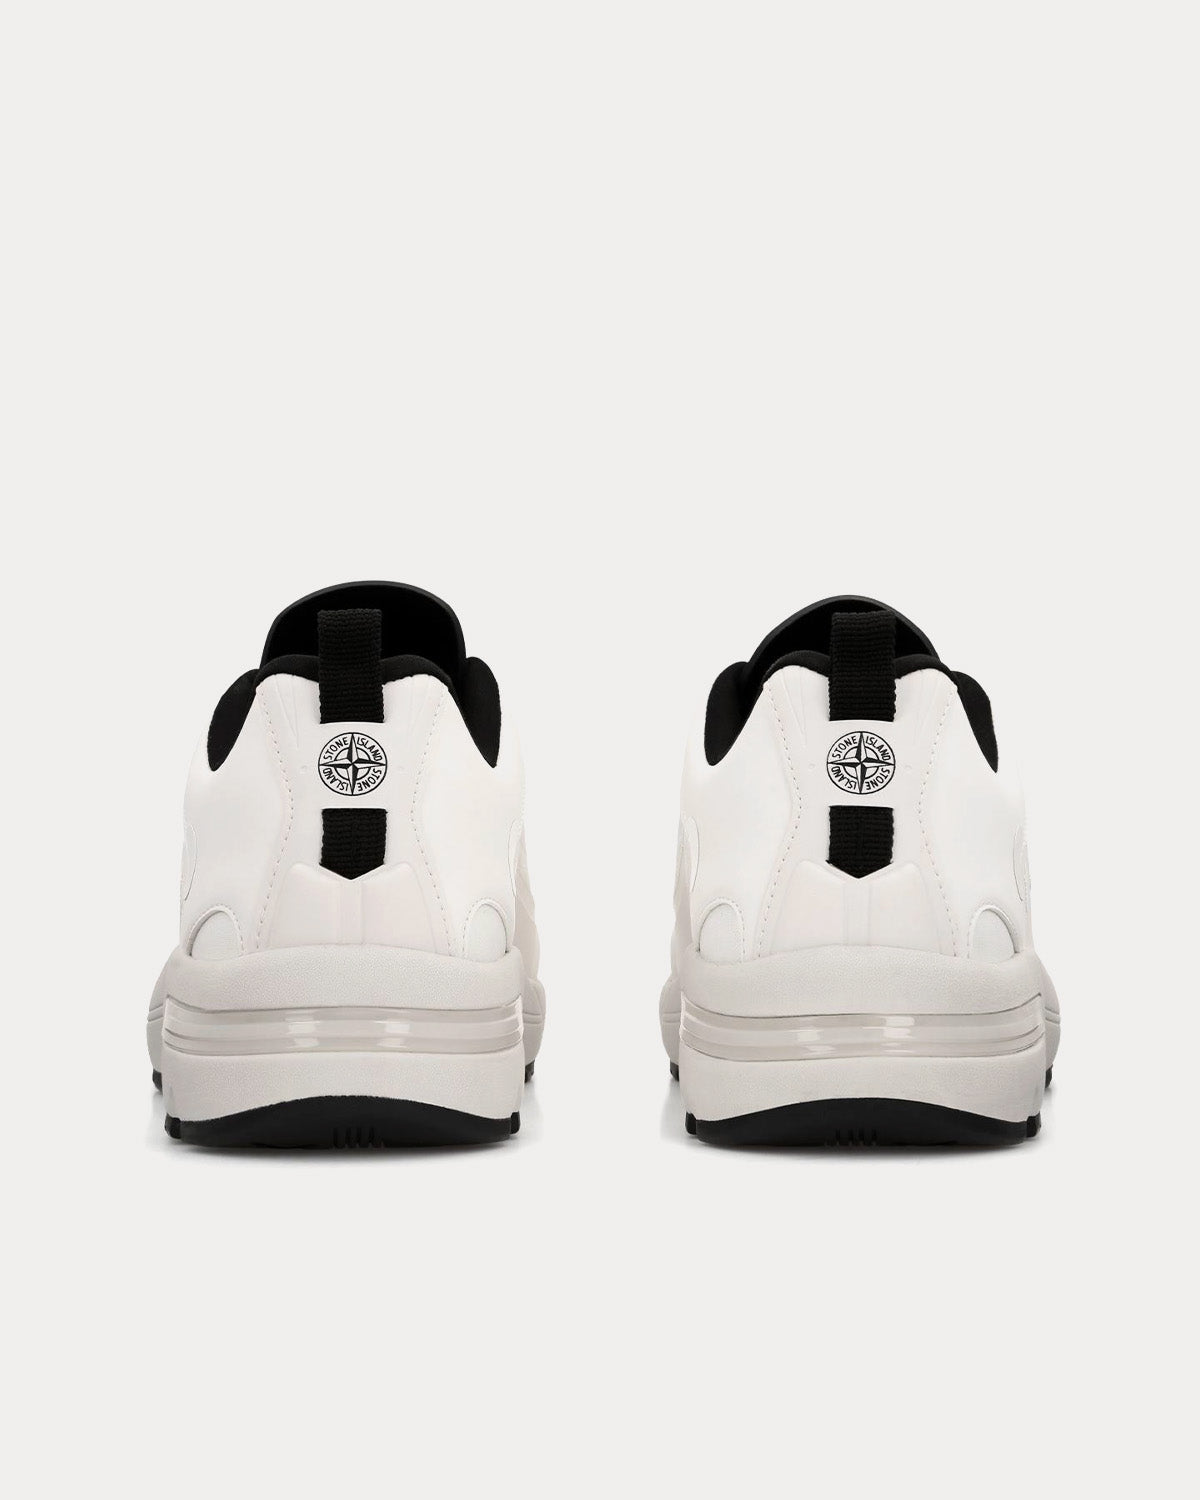 Stone Island - S0303 White Low Top Sneakers